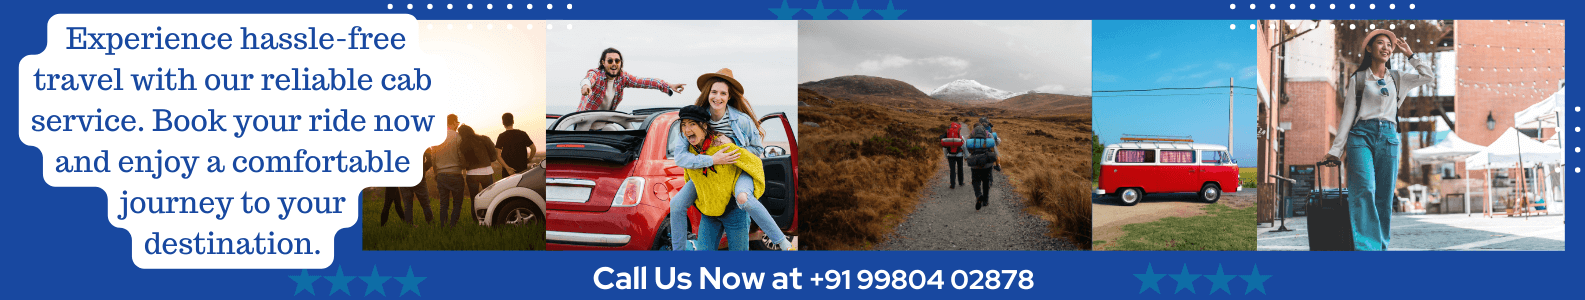 Experience hassle-free travel with our reliable cab service. Book your ride now and enjoy a comfortable journey to your destination.